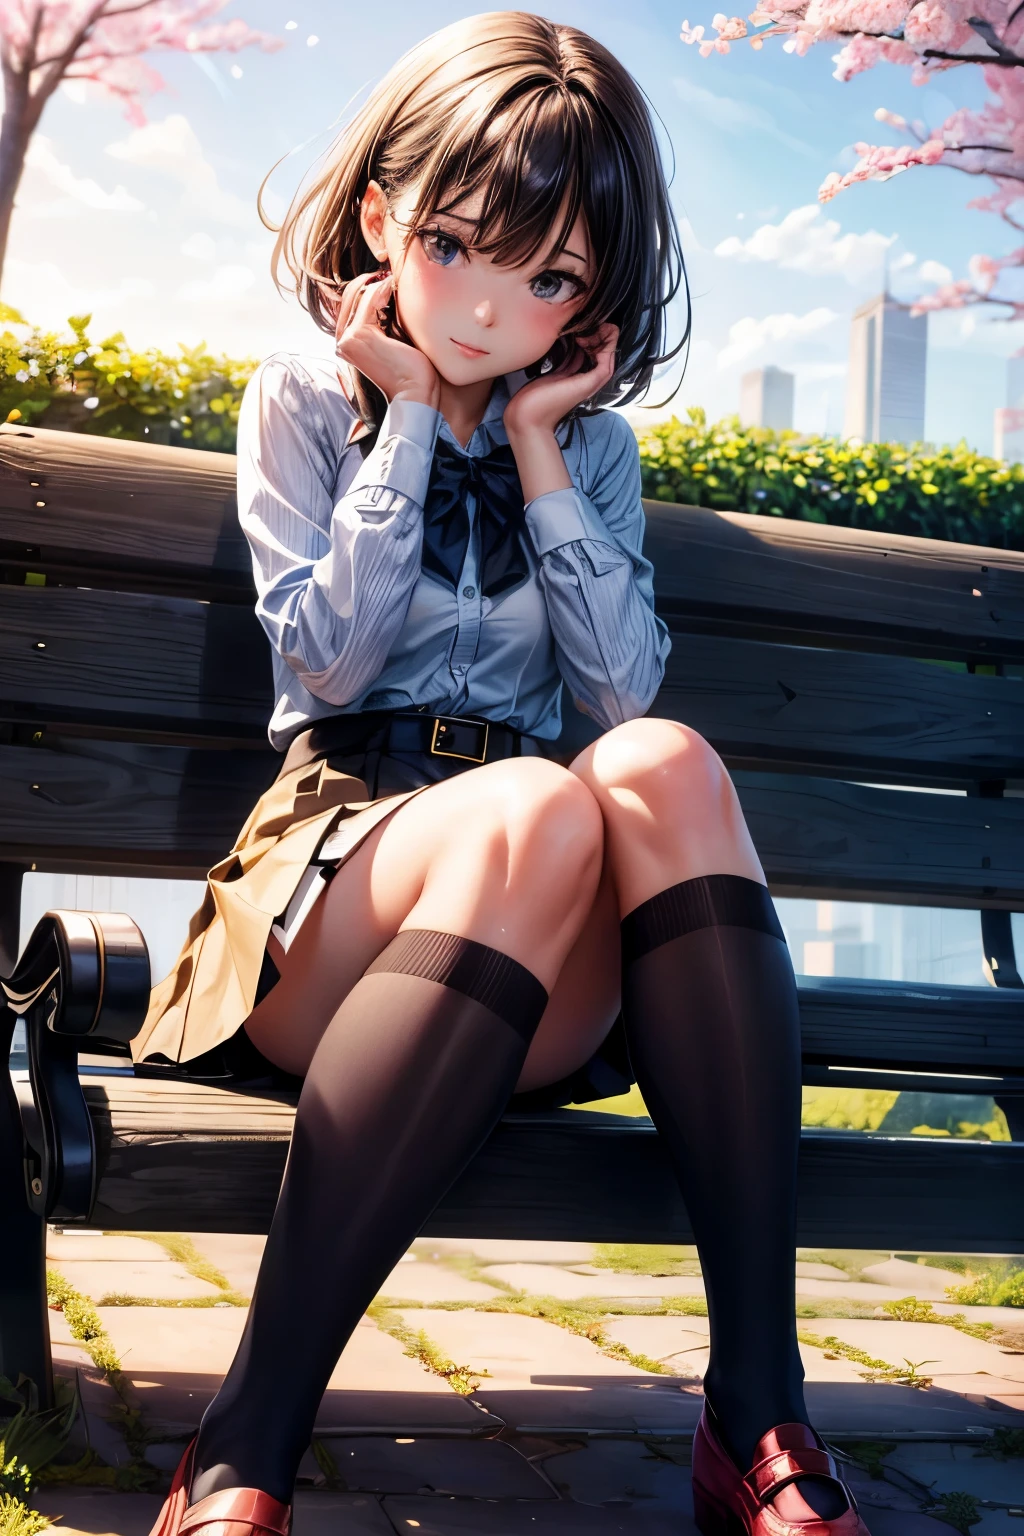 A pretty woman in stockings, with perfect long legs, and white socks. Dressed in a short skirt. A girl is sitting on a park bench and she has a shy face